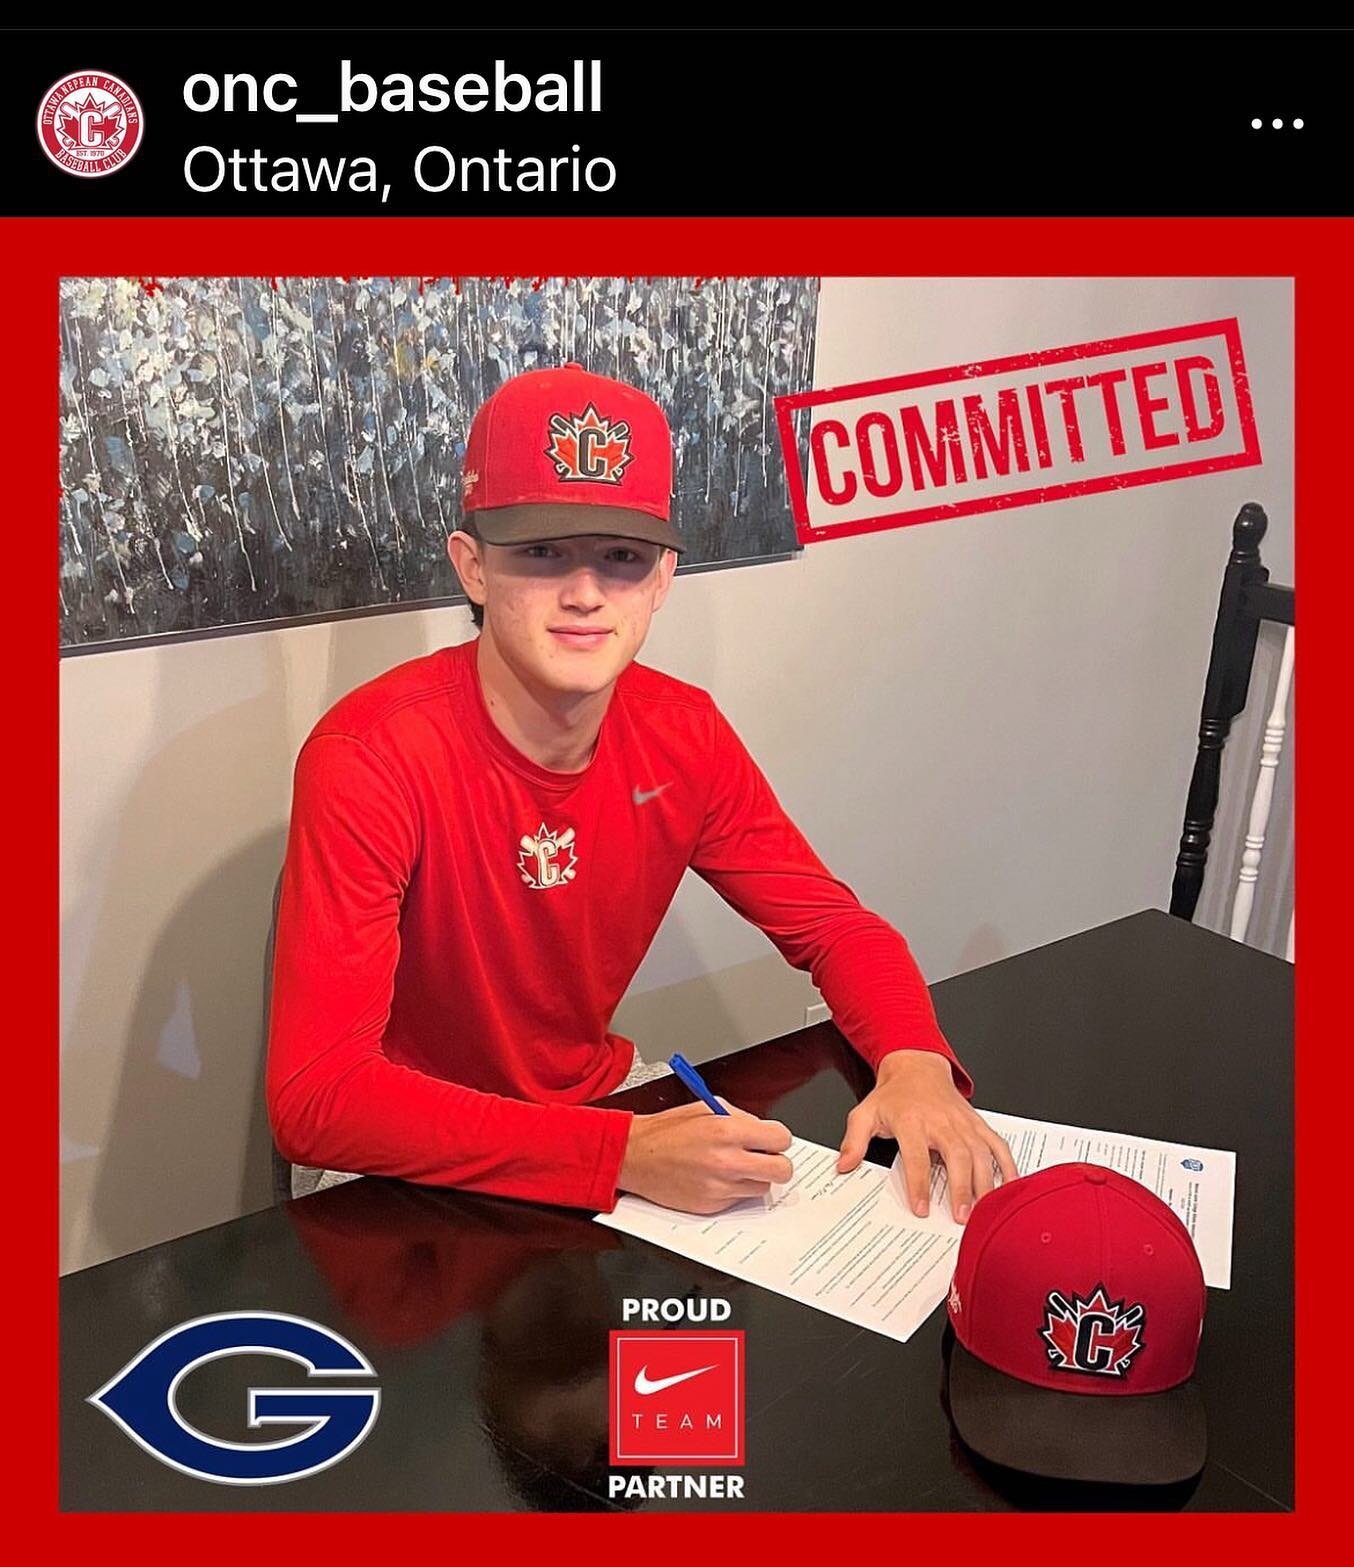 Congrats to ONC and Fitquest Athlete Evan Ogston on committing to Grayson College.  Can&rsquo;t wait for what the future brings for this young man !  #preparetocompete #oncbaseball  #baseballottawa